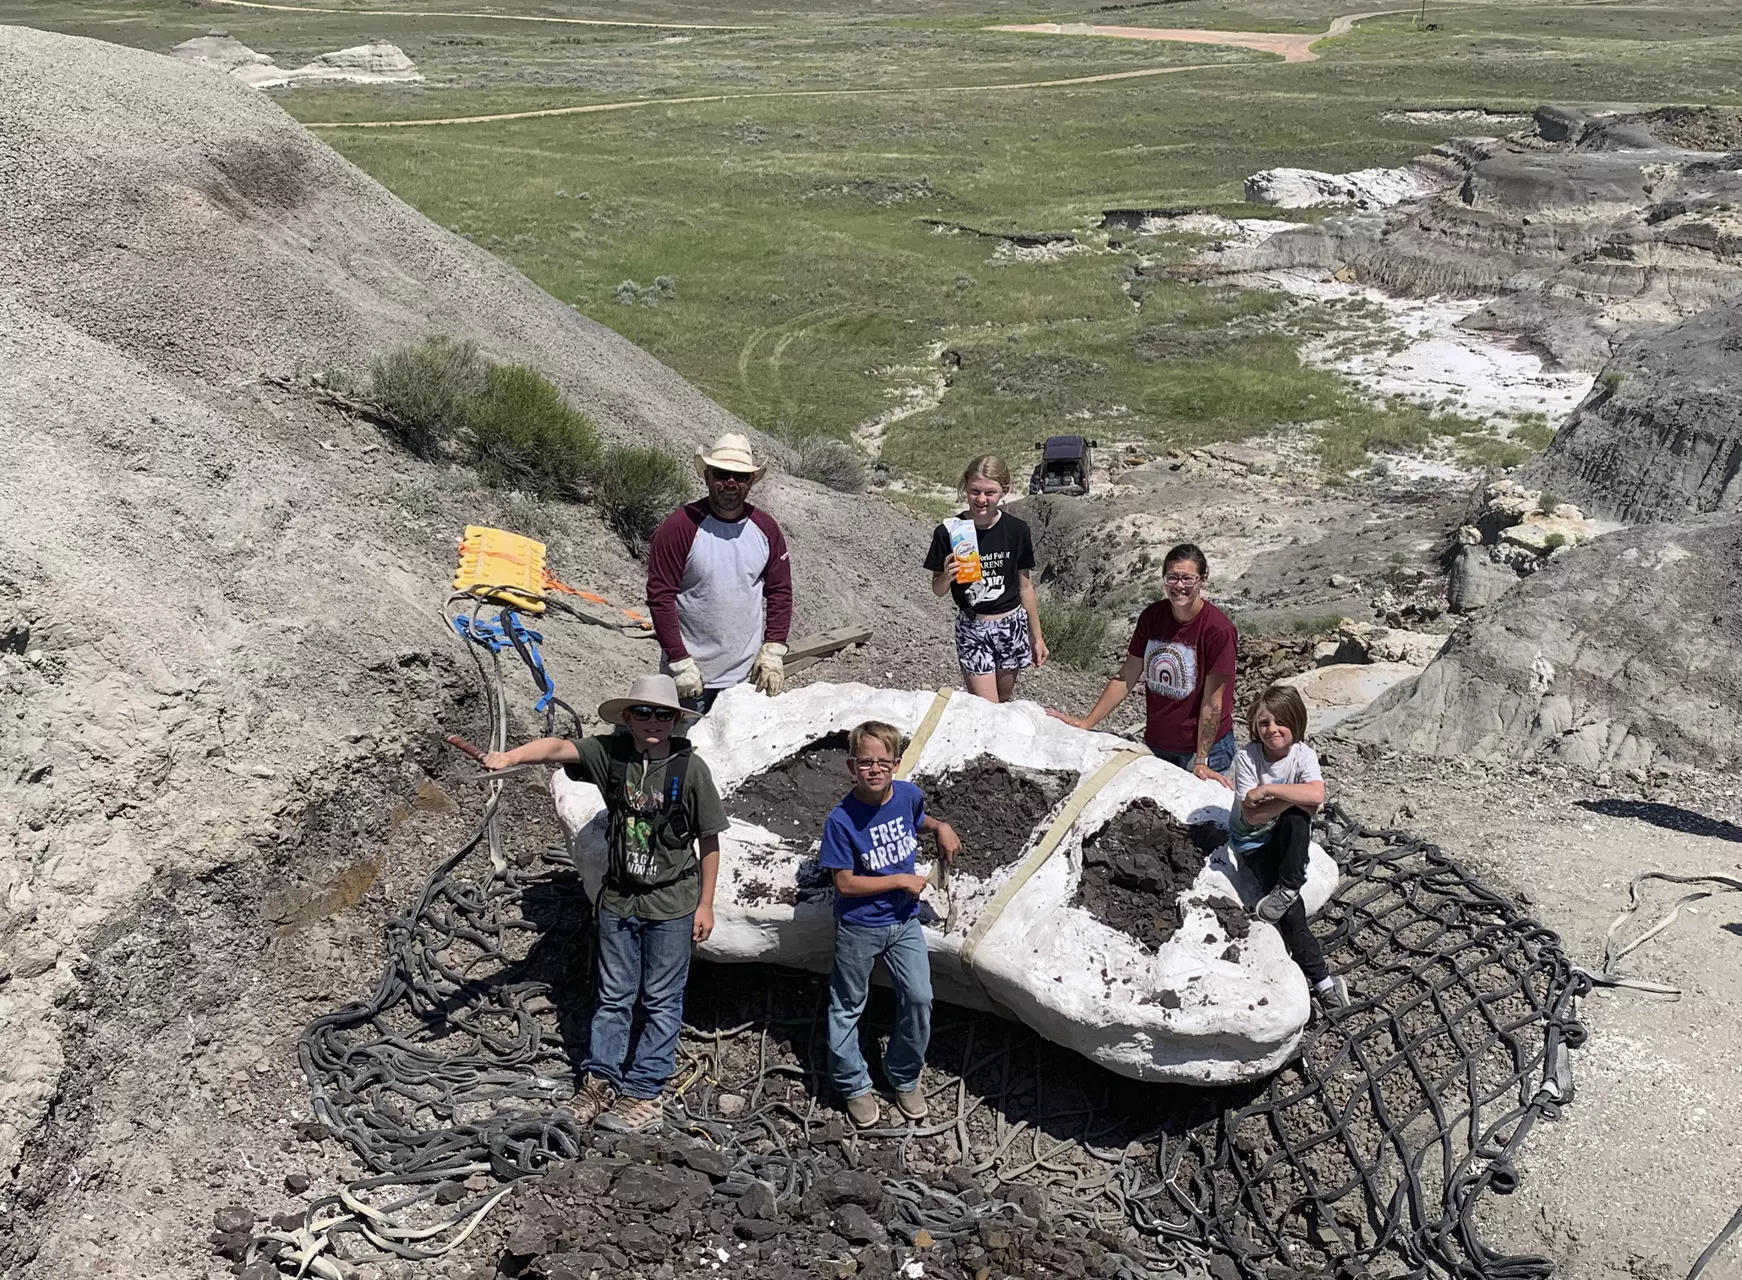 Rare megalodon 'tooth' discovered in a sudden find by fossil-hunter family 